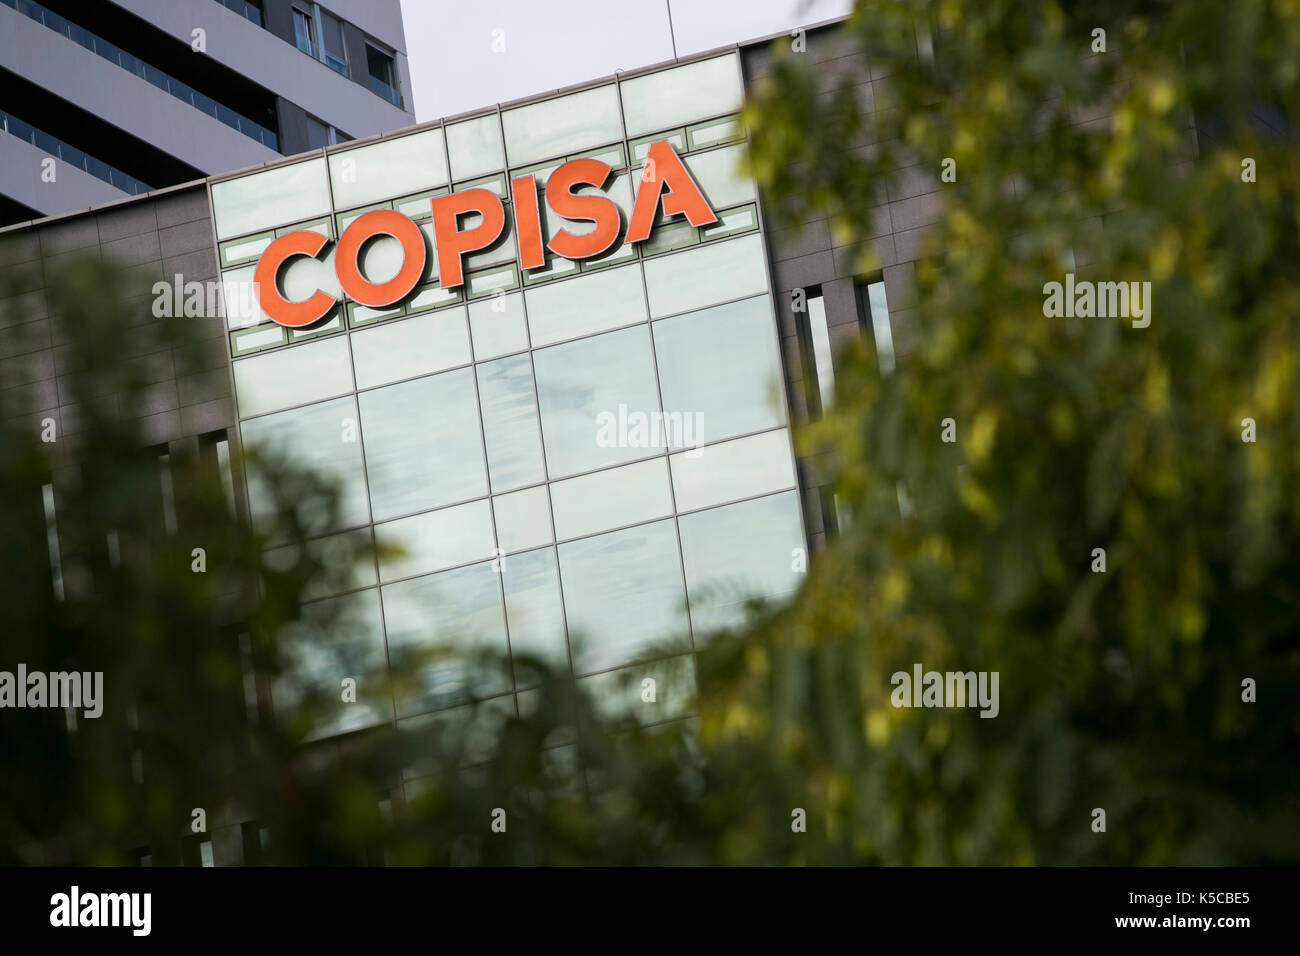 A logo sign outside of the headquarters of Grupo Copisa in Barcelona, Spain on August 30, 2017. Stock Photo